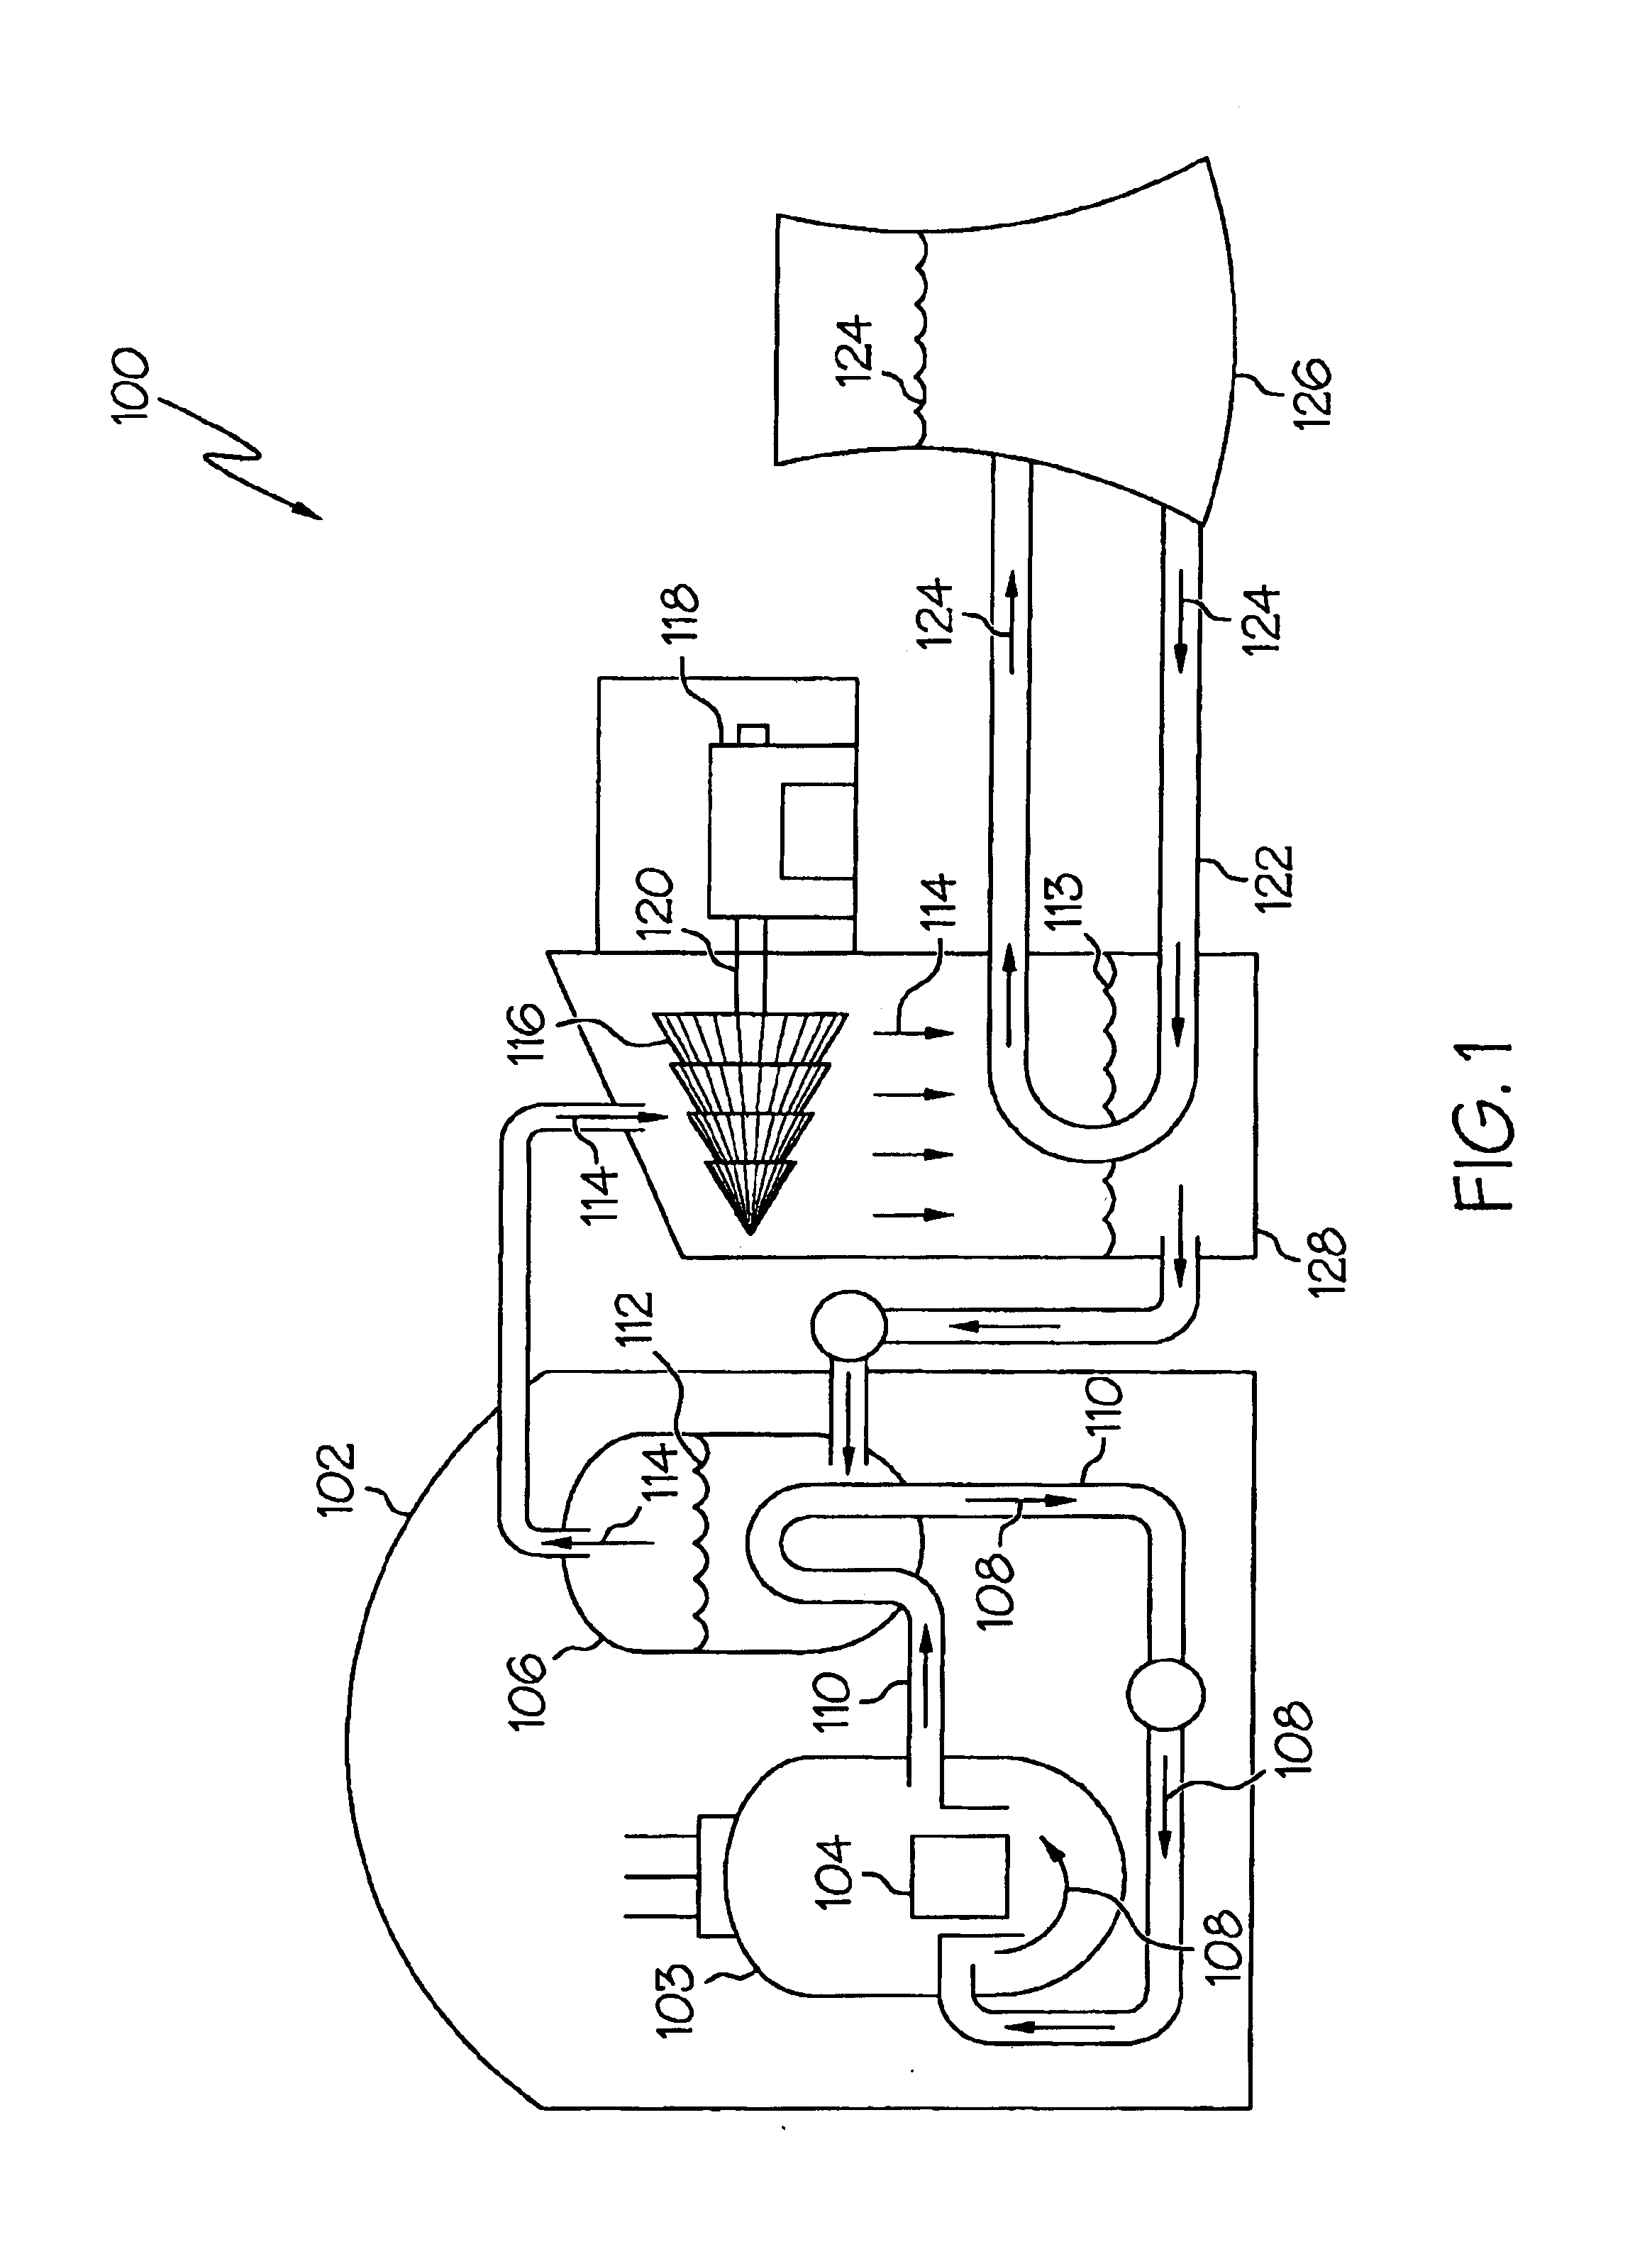 Fuel assemblies in a reactor core and method of designing and arranging same